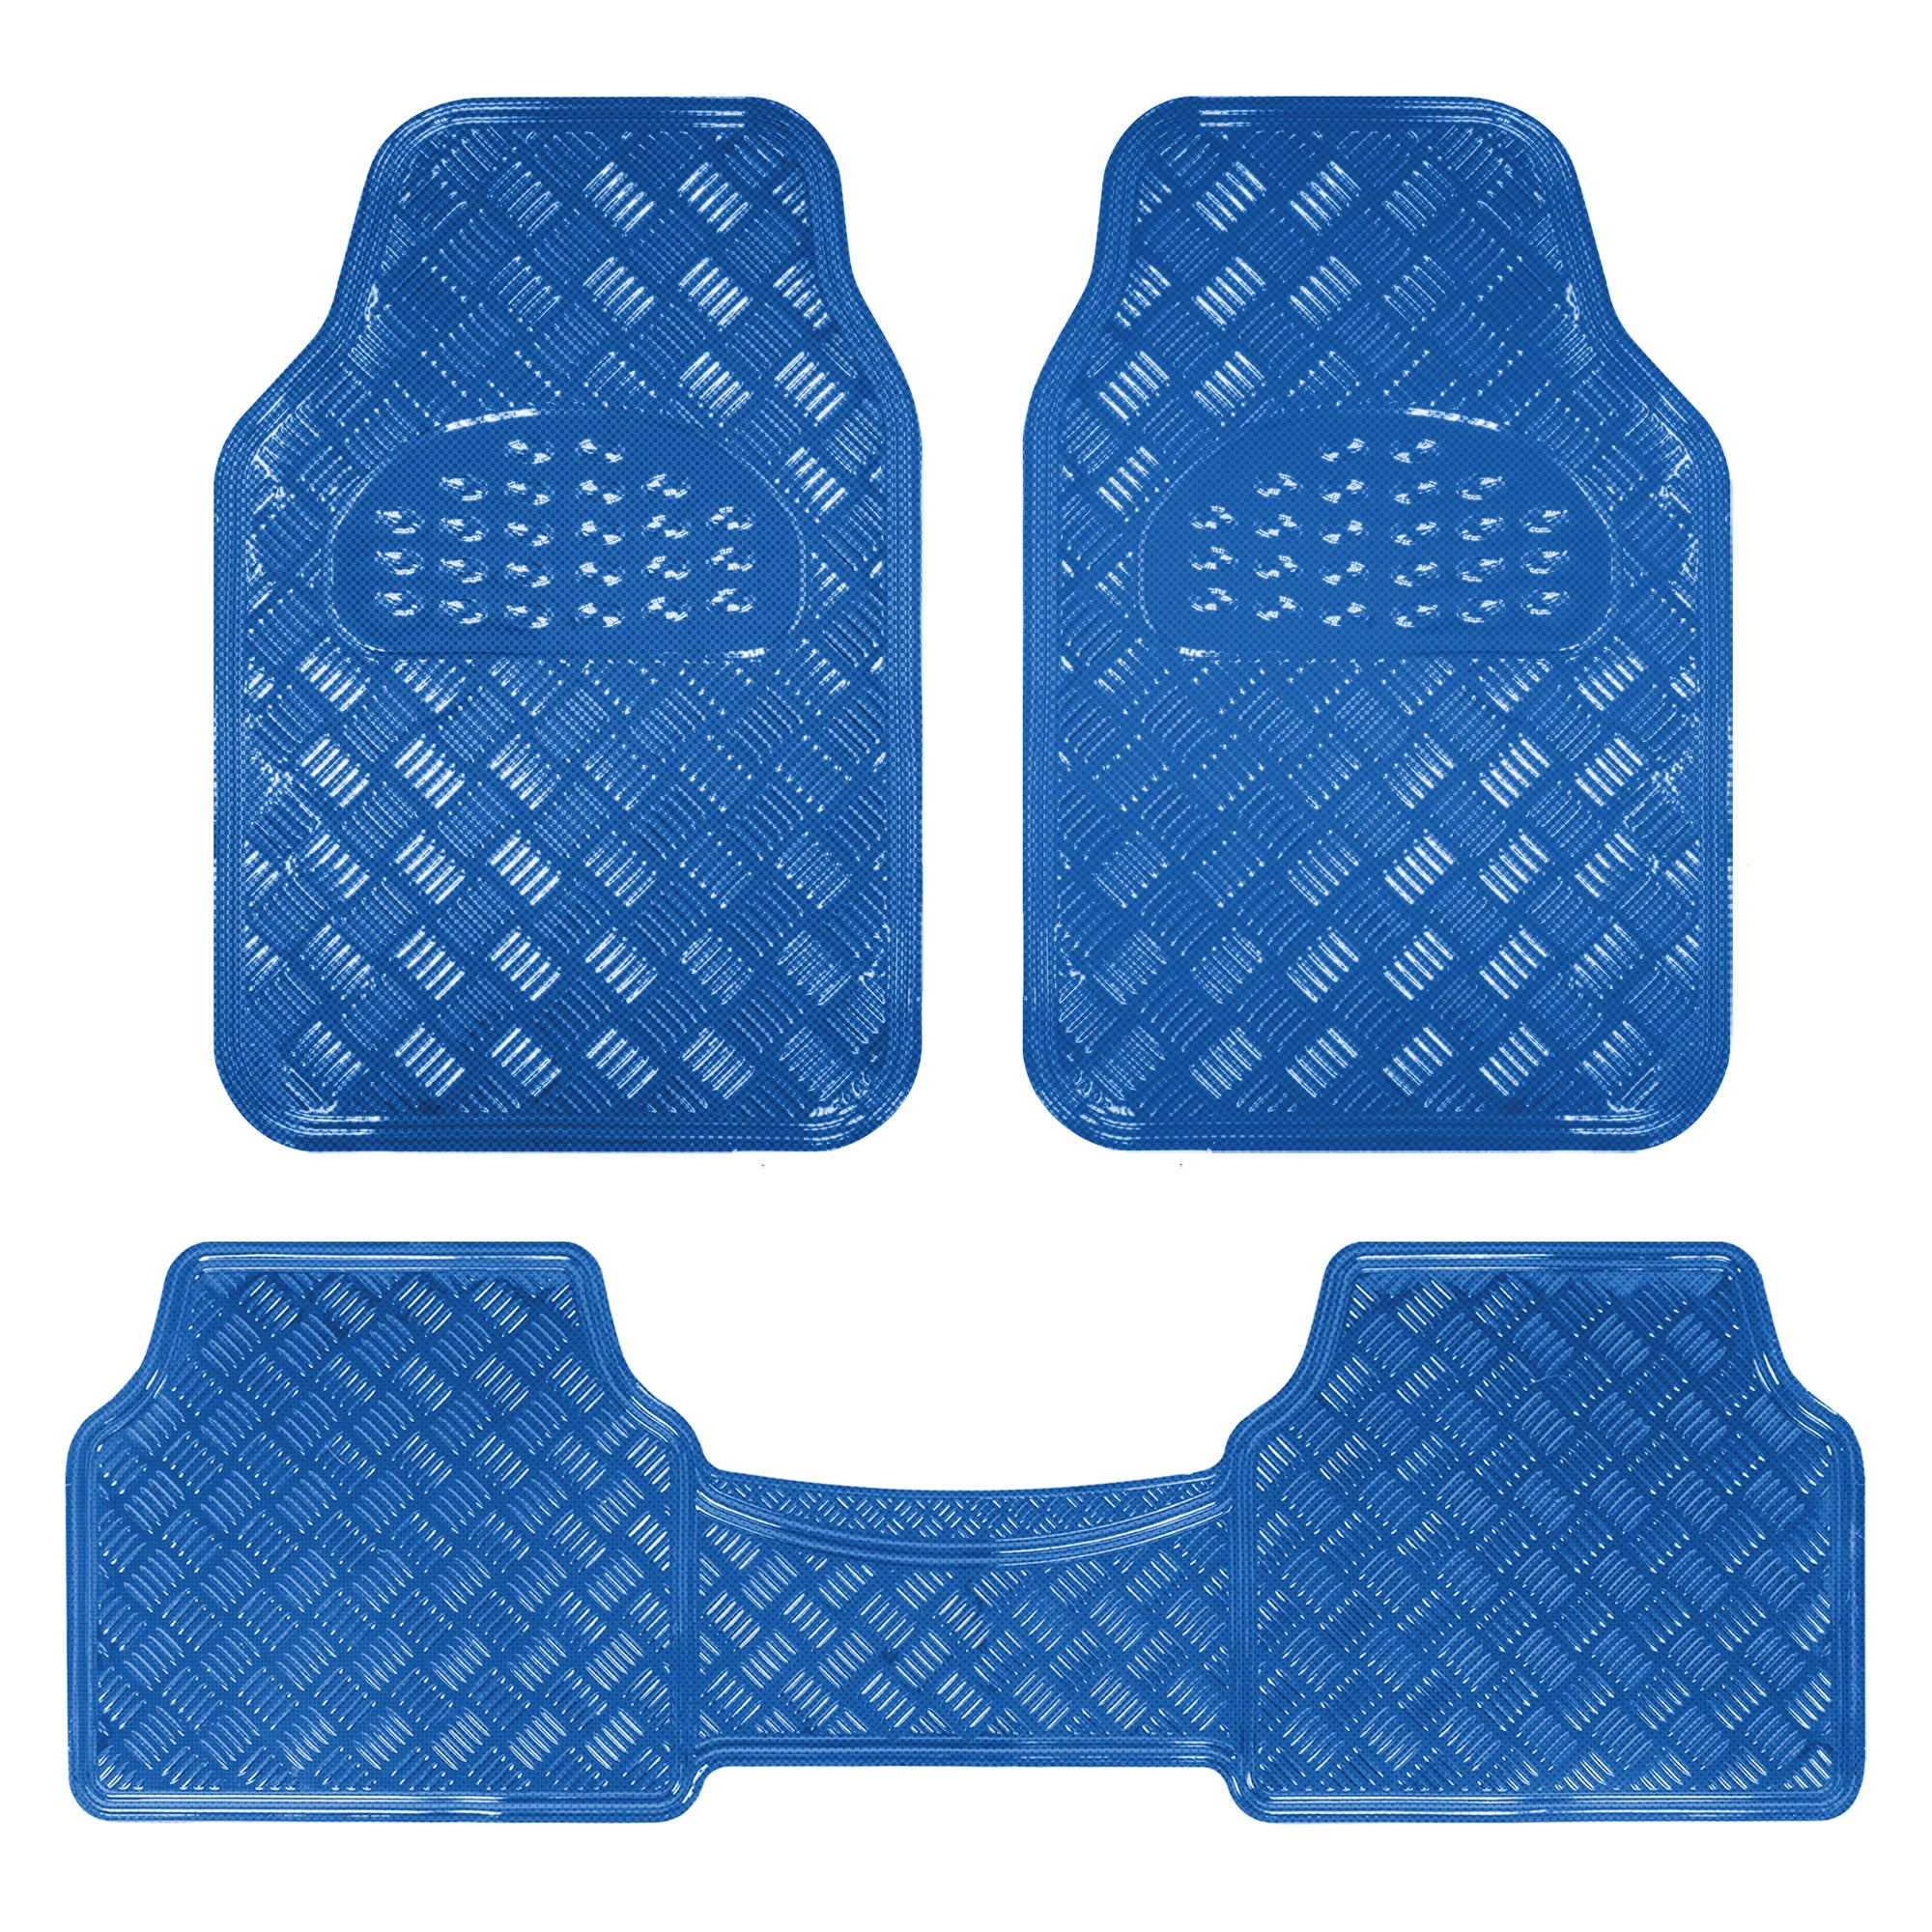 BDK MT-643-BL Metallic Bling Design Car Floor Mats - 3-Piece Set of Heavy Duty All Weather with Rubber Backing Fits Car Truck Van SUV (Blue)